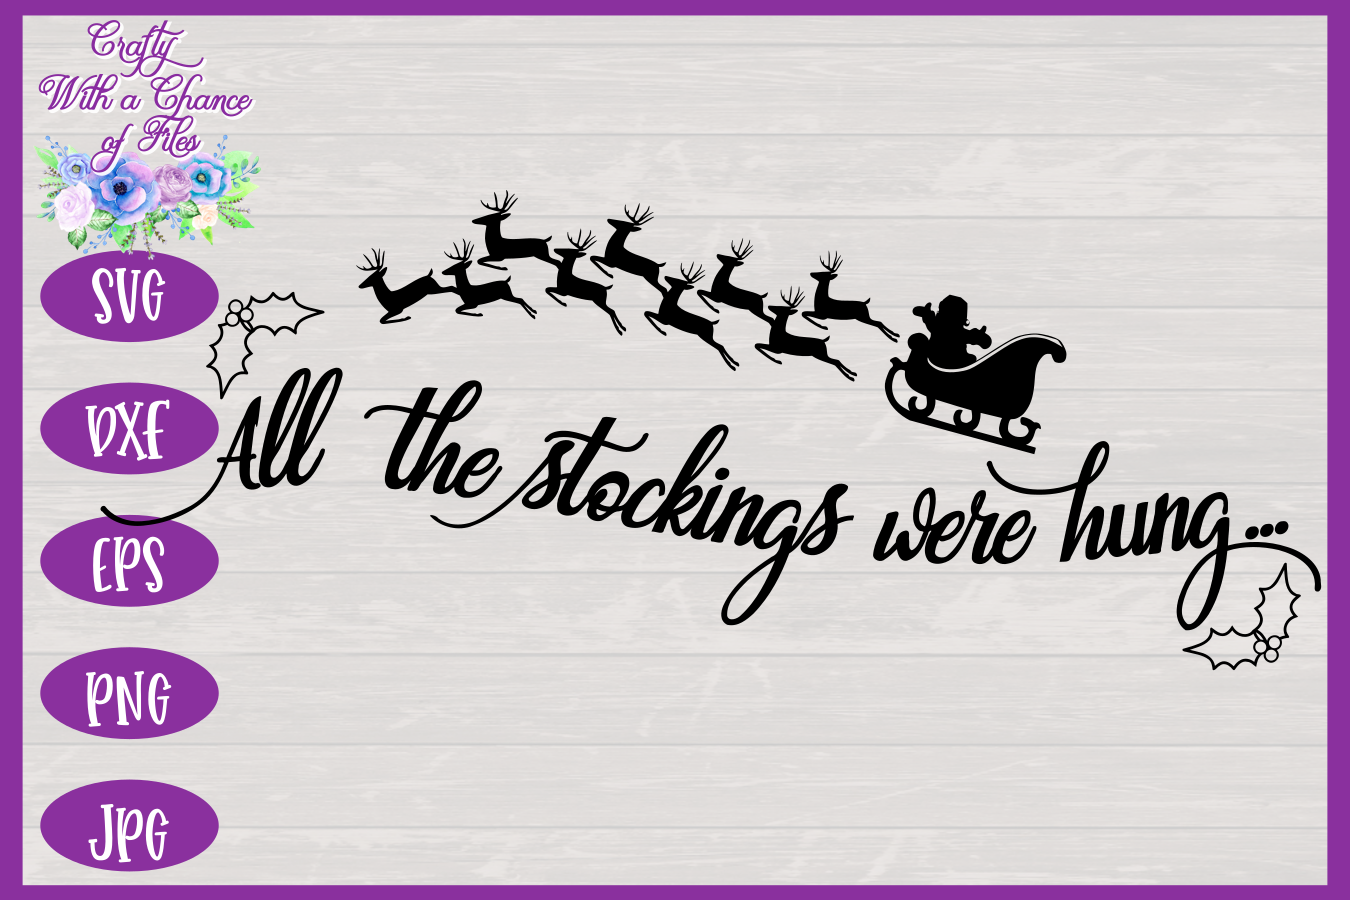 Christmas SVG All The Stockings Were Hung SVG Stocking Holder SVG